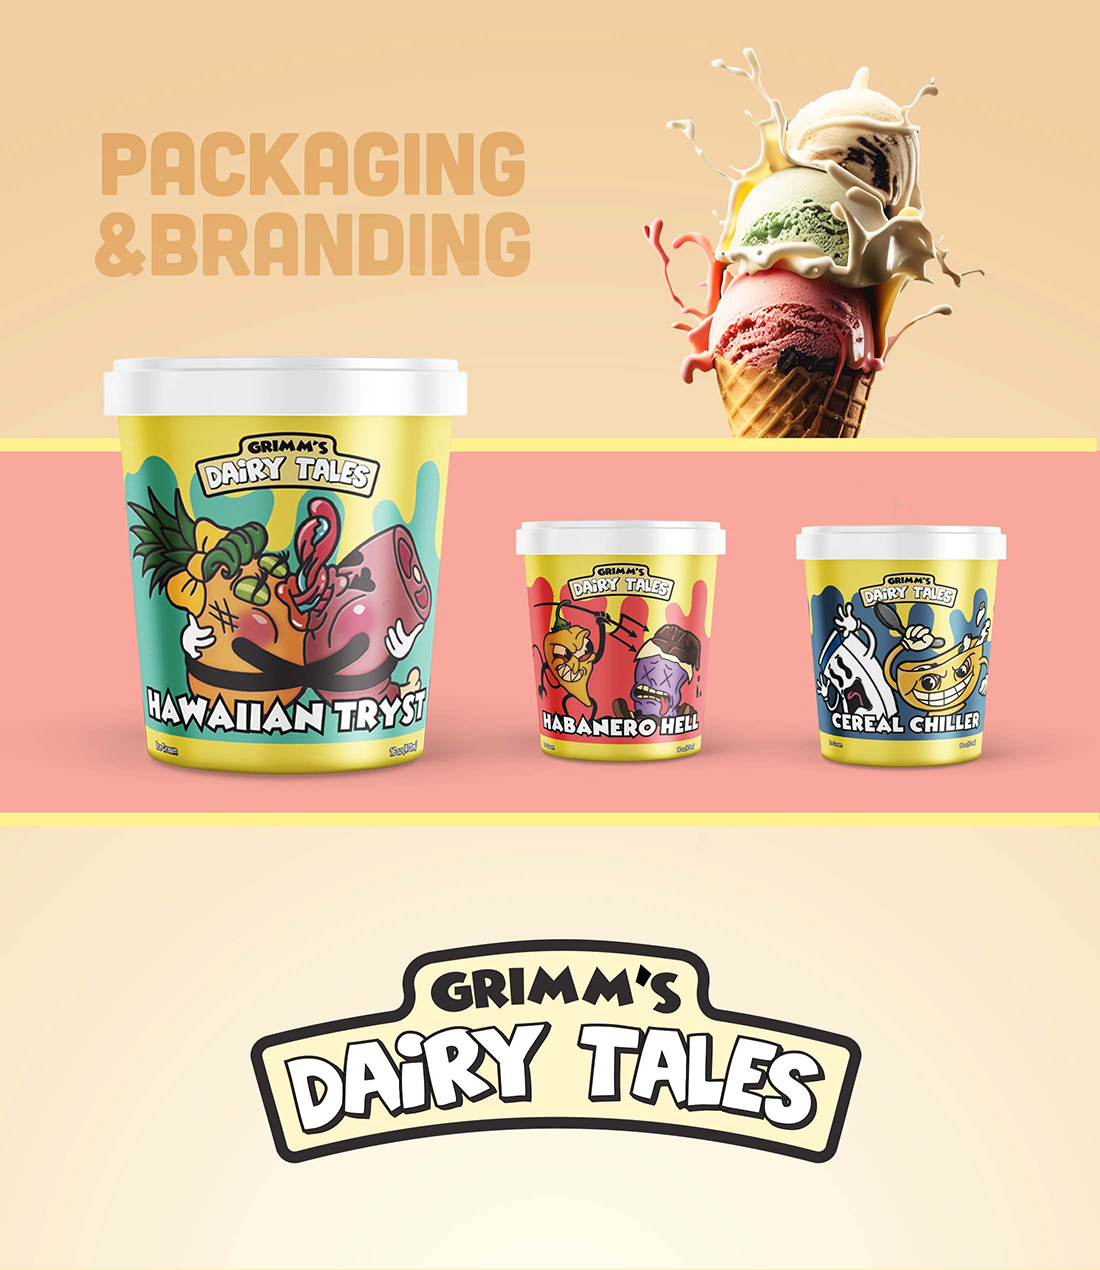 Grimm’s Dairy Tales - Image 2